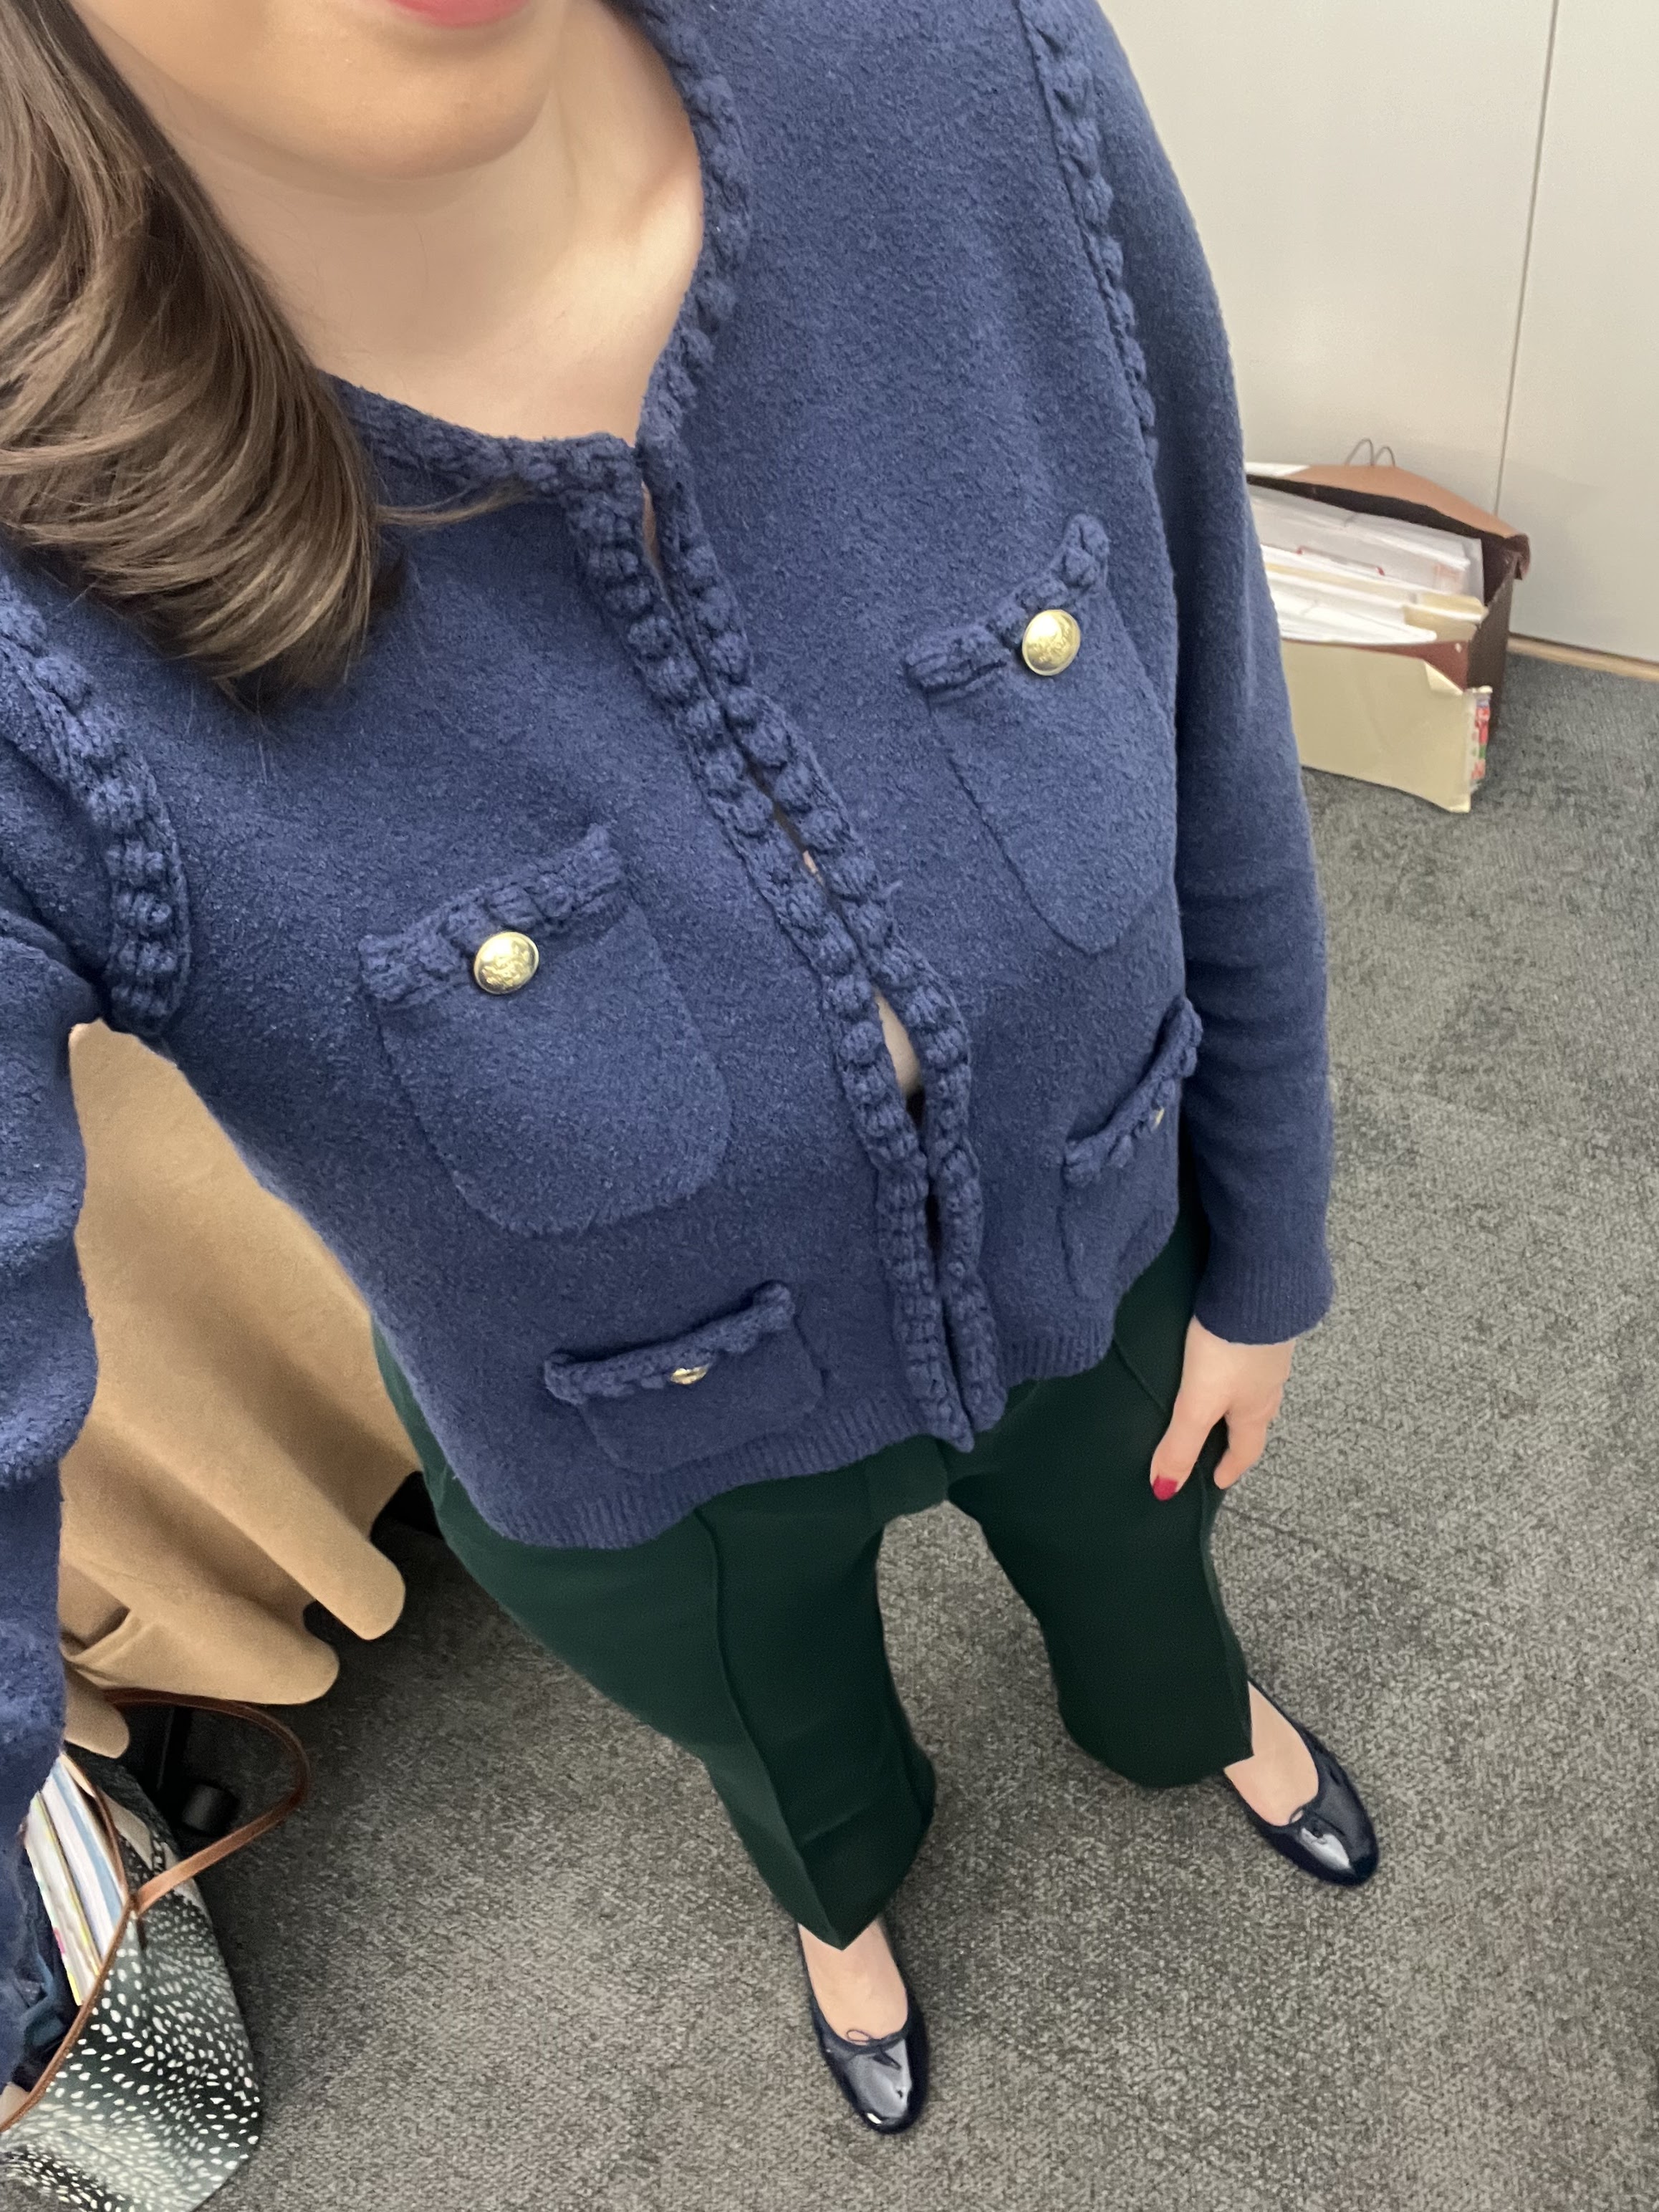 classic outfit, preppy outfit, lady jacket, jcrew, ann taylor, suiting, office style, office outfit, winter workwear, law firm, suiting, professional clothes, business casual, office style, workwear